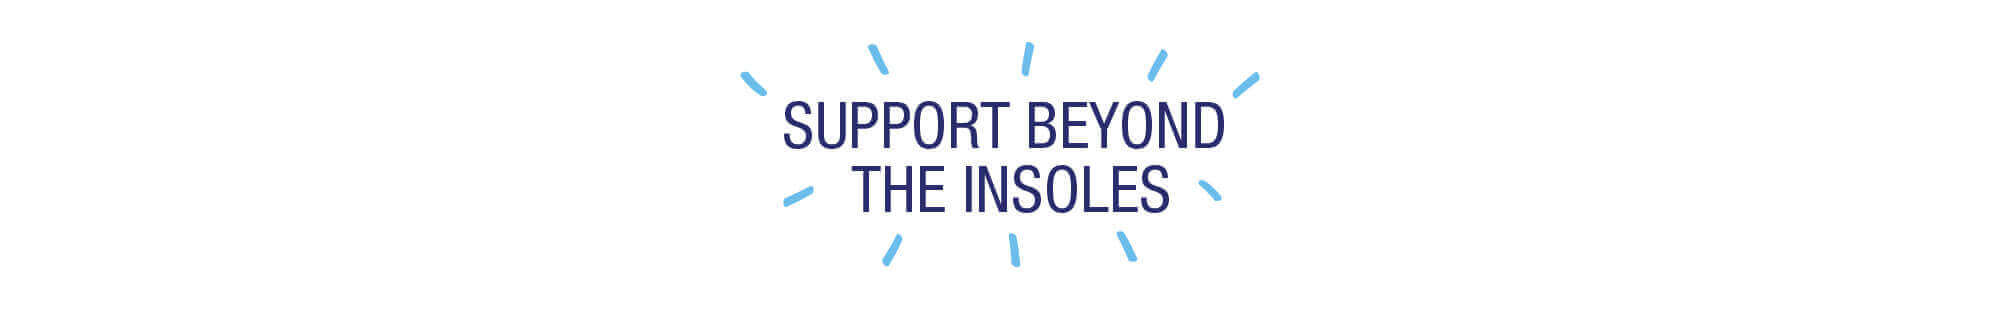 Support Beyond the Insoles